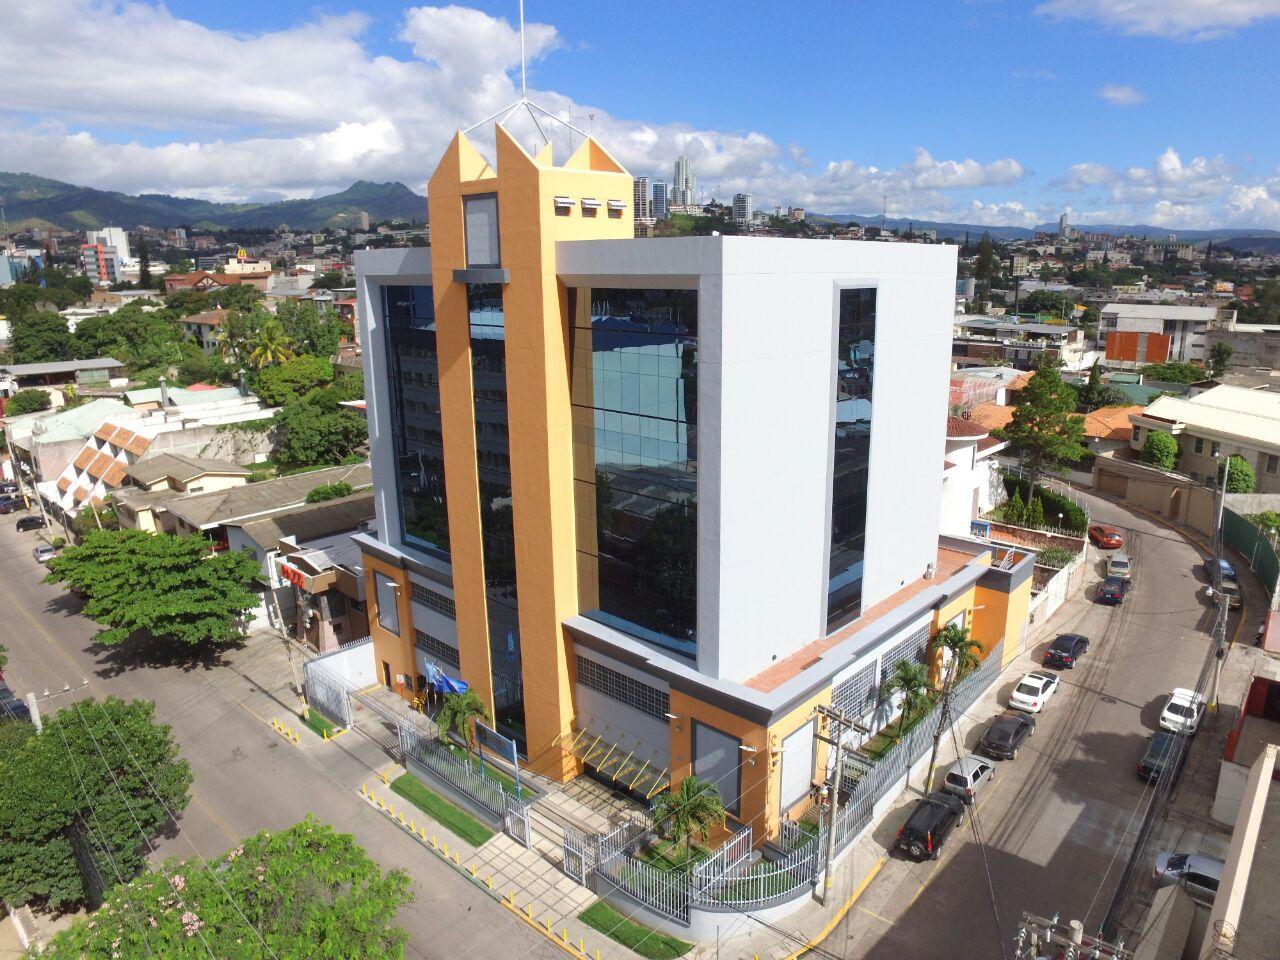 Best area to stay in Tegucigalpa - Colonia Palmira & around the US embassy